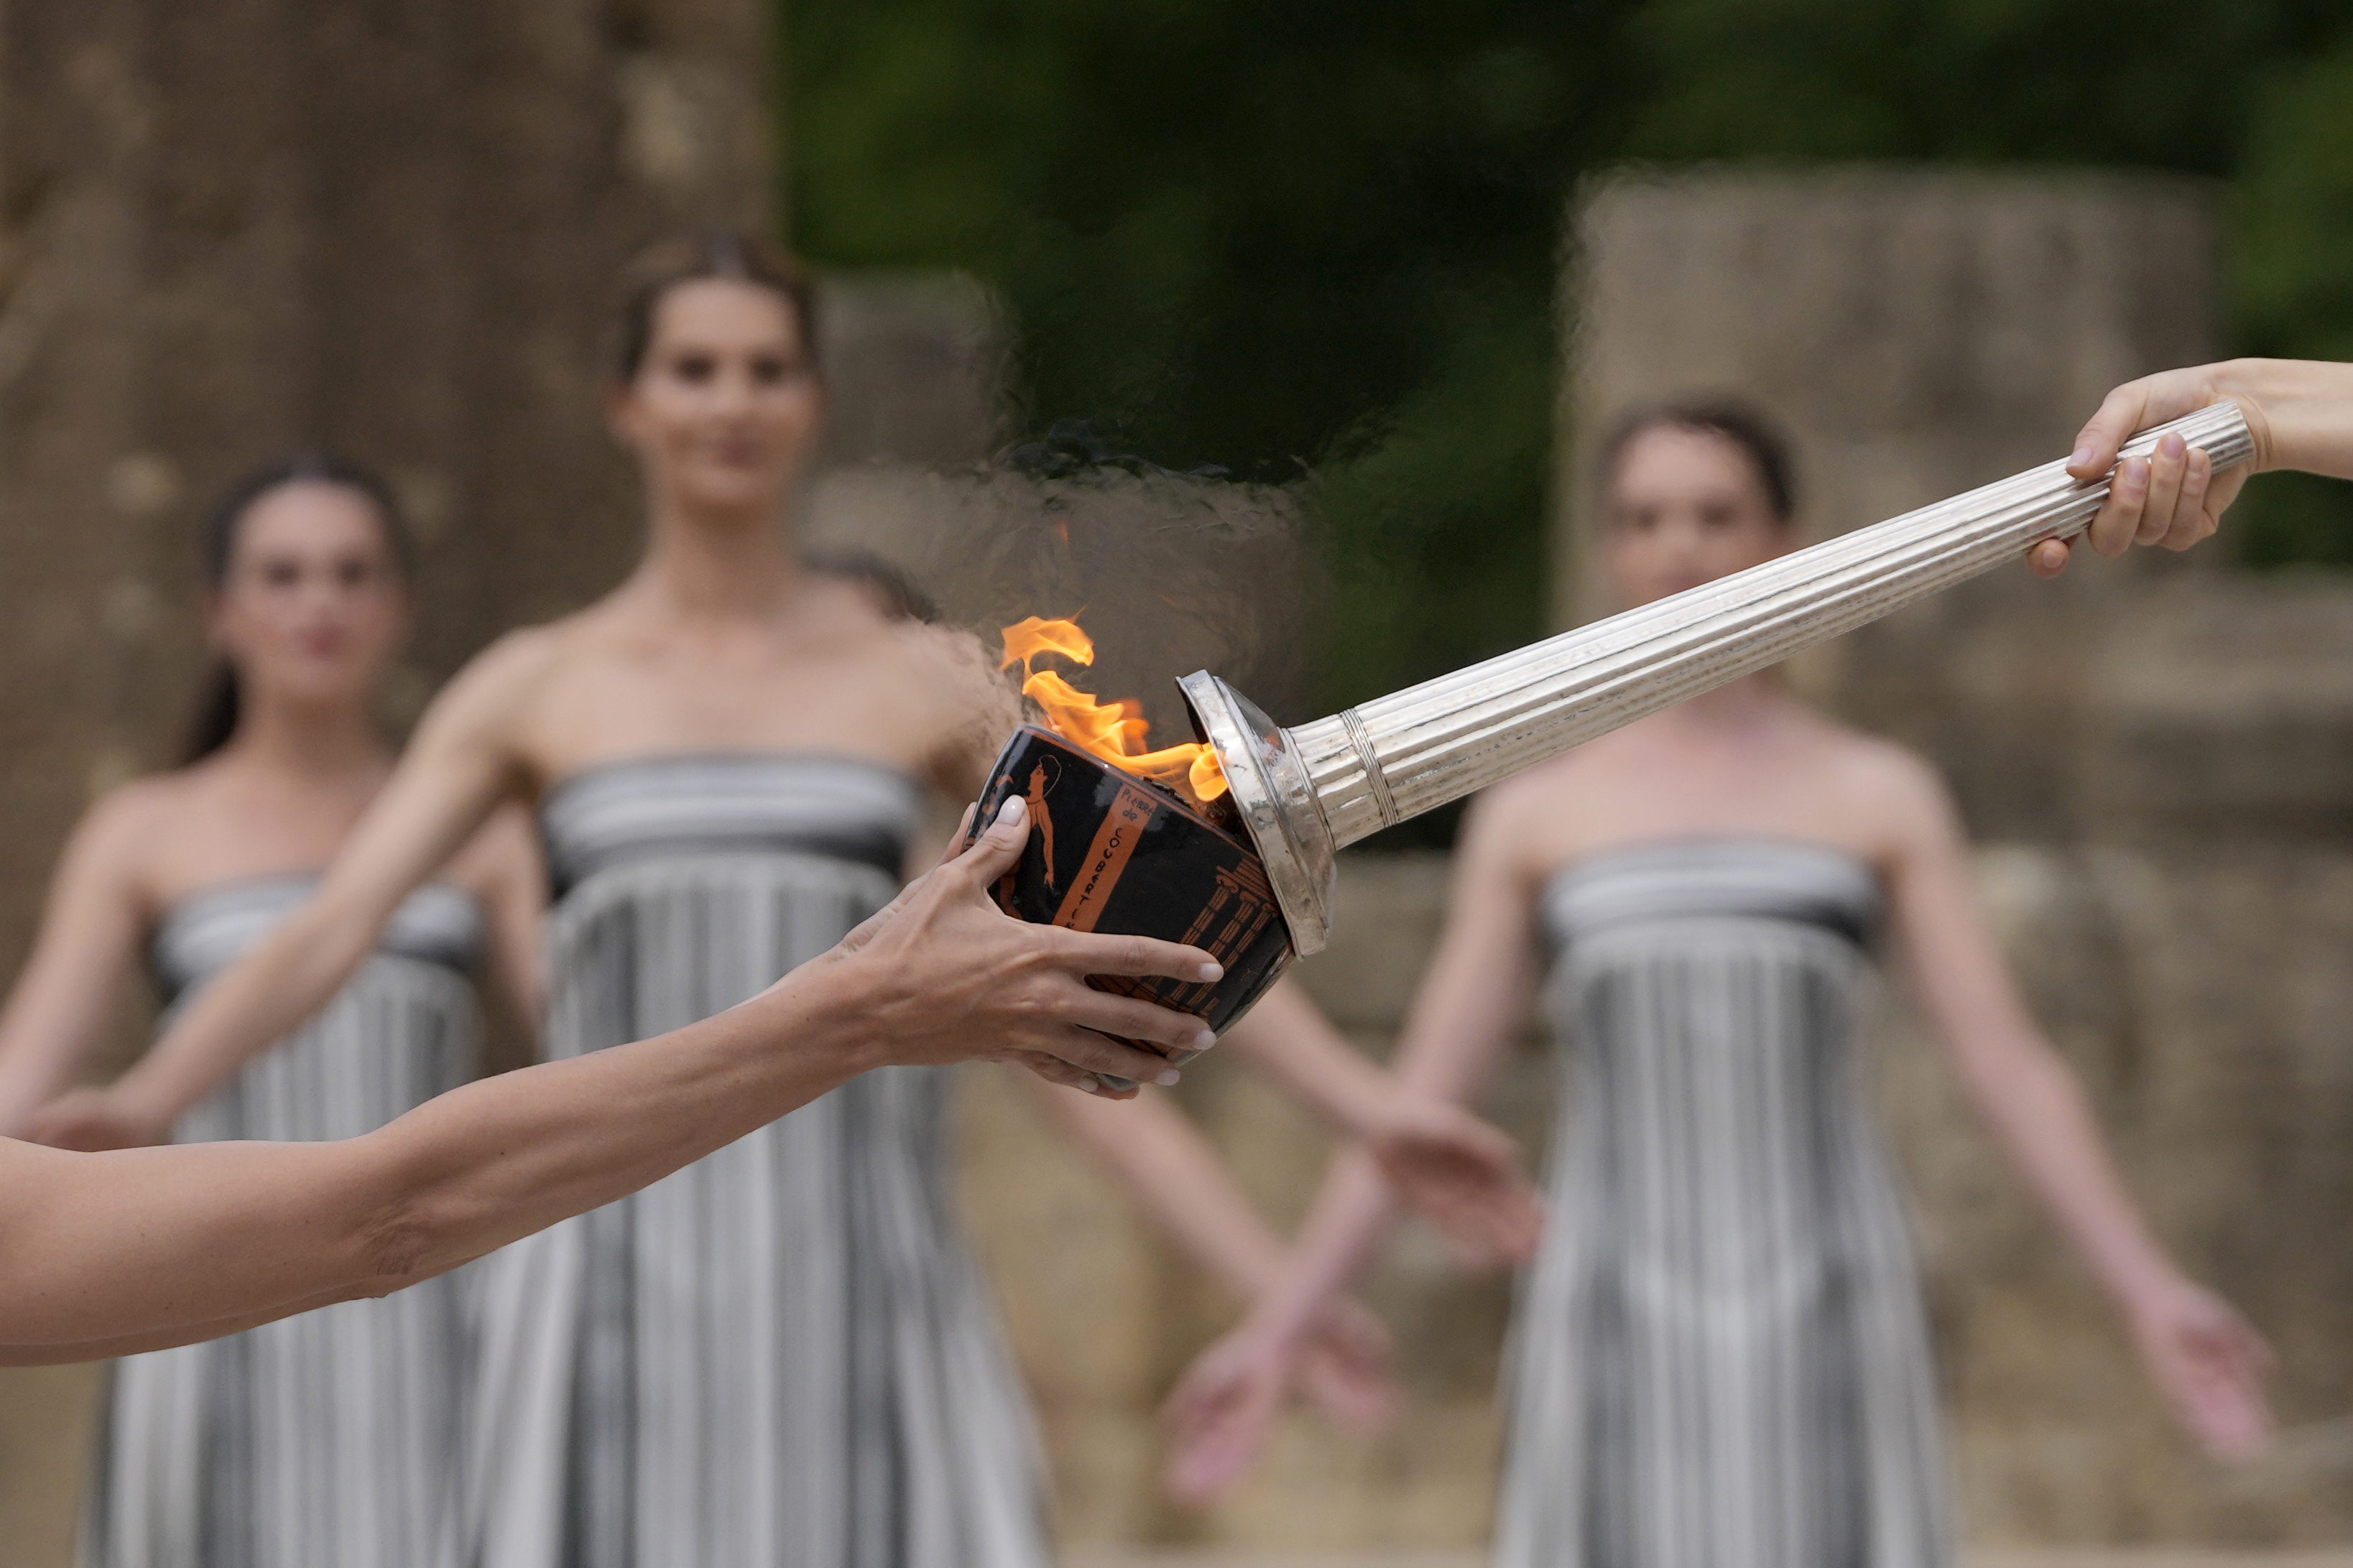 Despite weather glitch, the Paris Olympics flame is lit at the Greek
cradle of ancient games